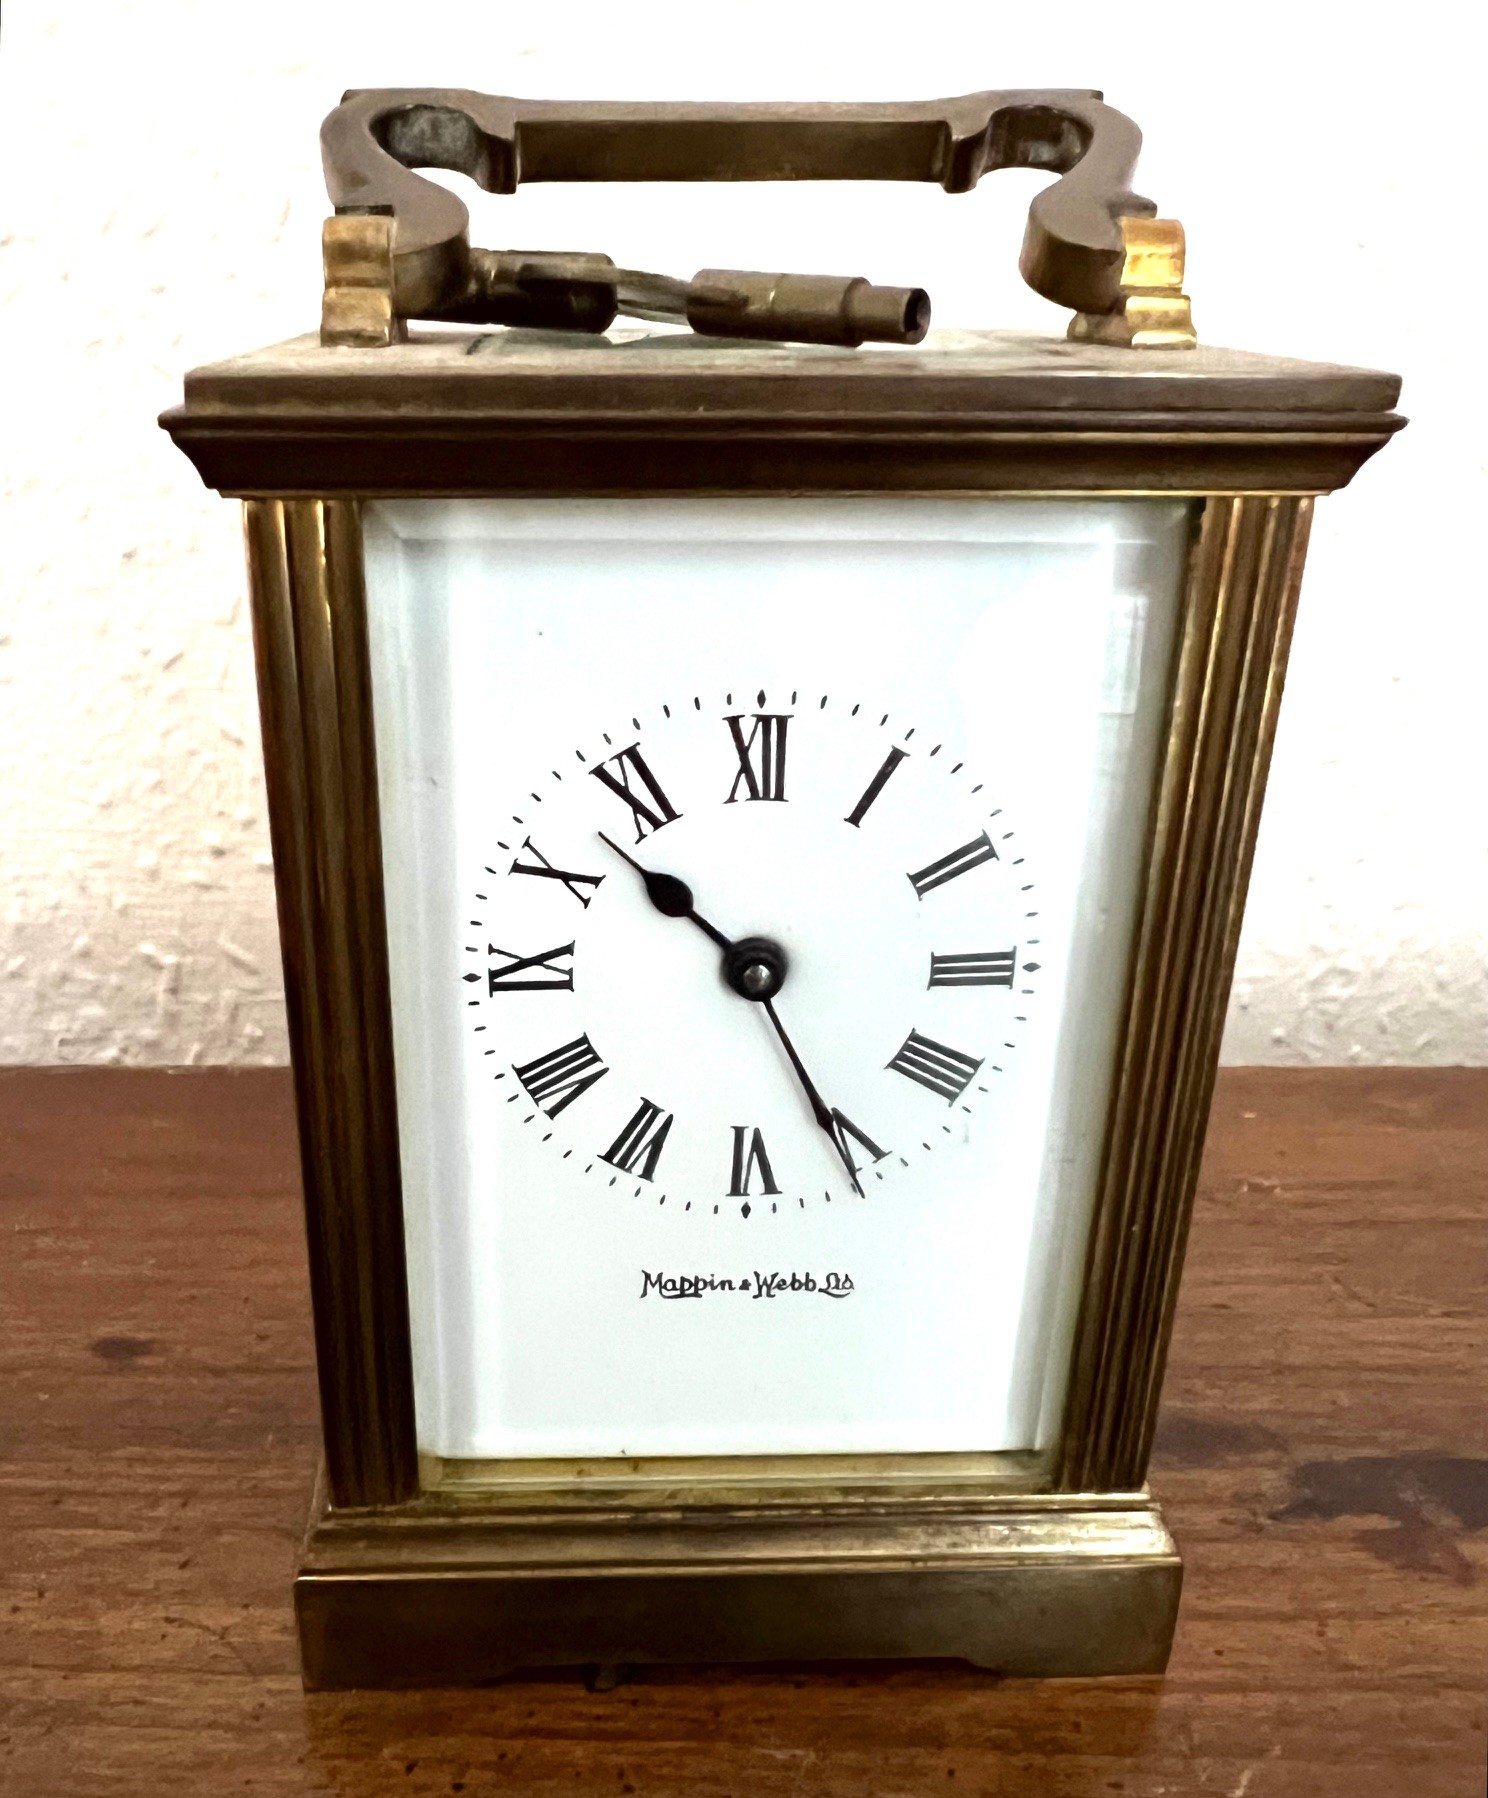 MAPPIN & WEBB CARRIAGE CLOCK TIME PIECE